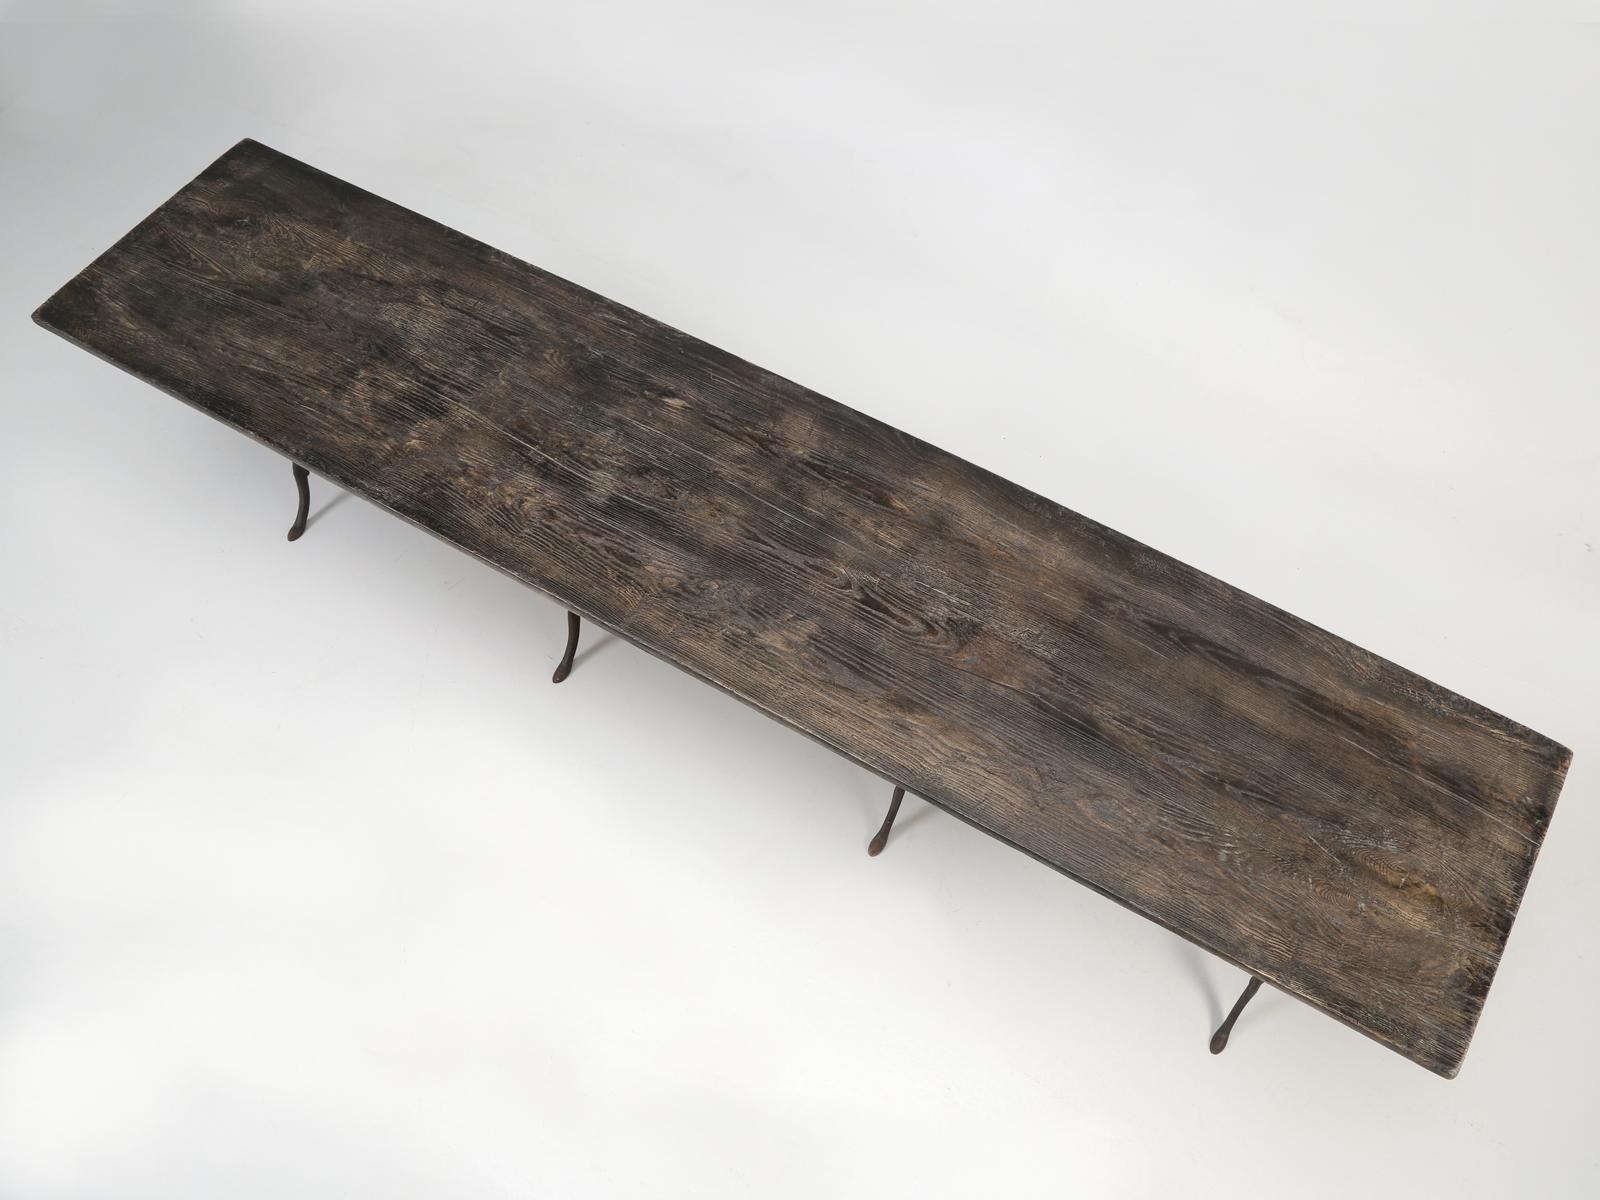 Antique French Bistro table composed of a distressed patina wood plank top and a cast iron trestle base. Being 113” long, the antique French trestle table will seat 12 people. This is by bar the longest antique French Bistro table we have ever